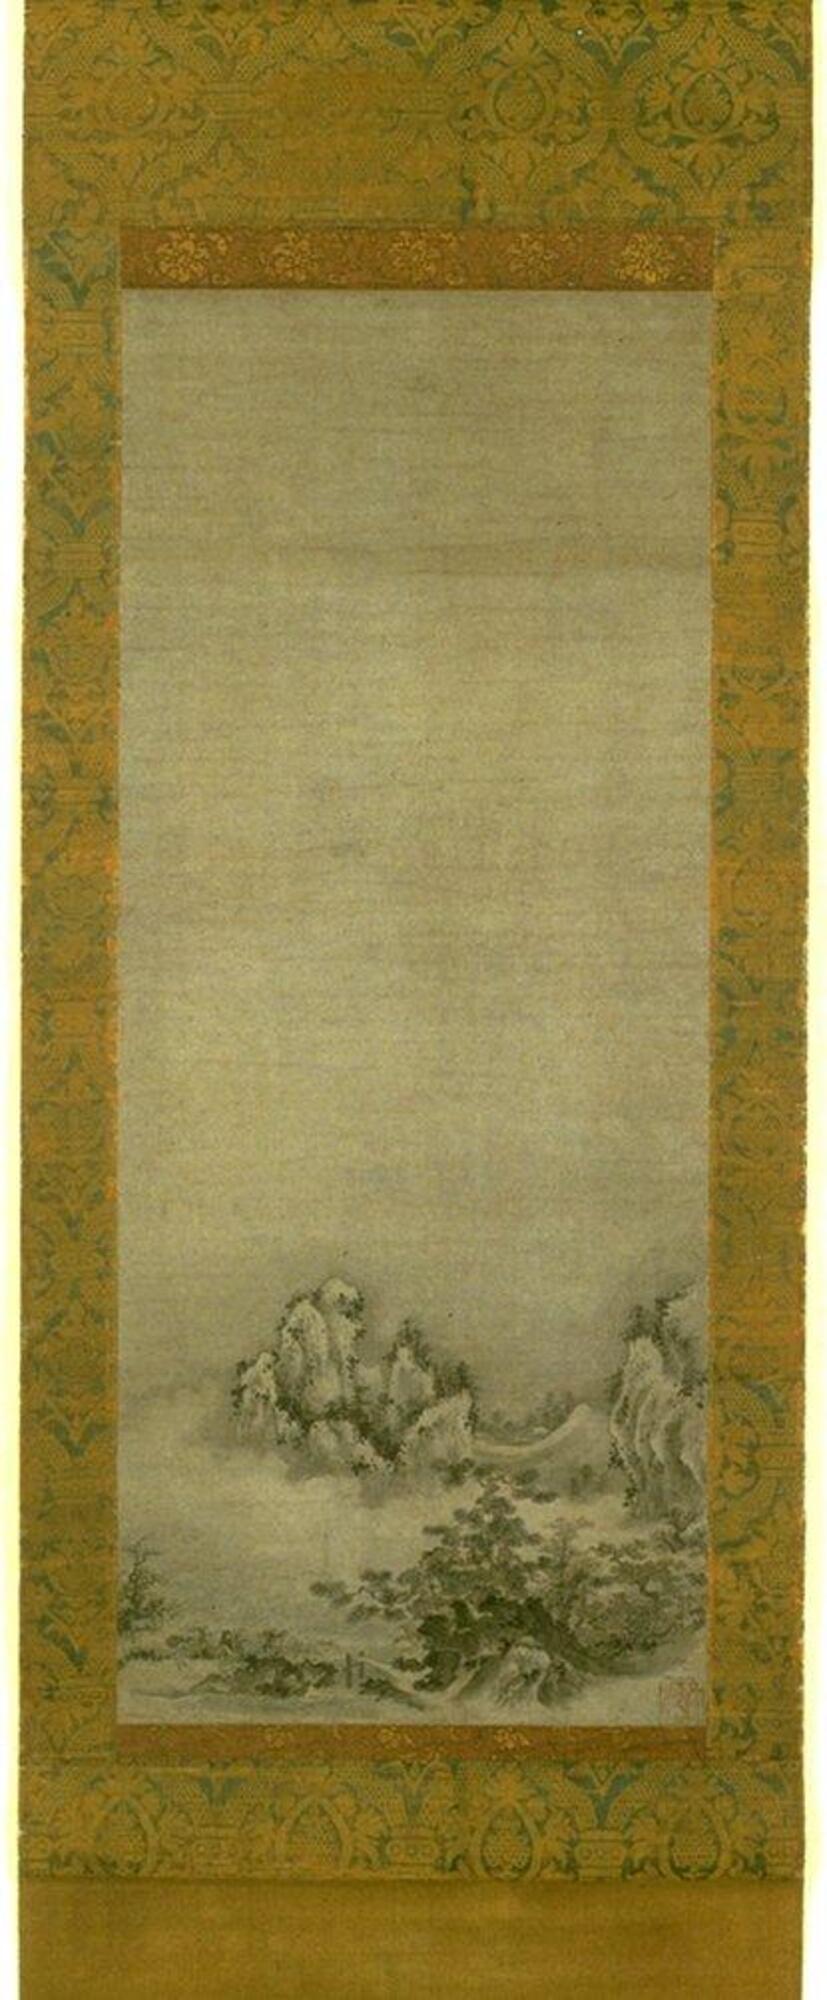 The entire top portion of this painting is seemingly blank, but represents the air and atmosphere.  Below are mountains hugged by clouds and trees and vegetation in the phase of autumn.